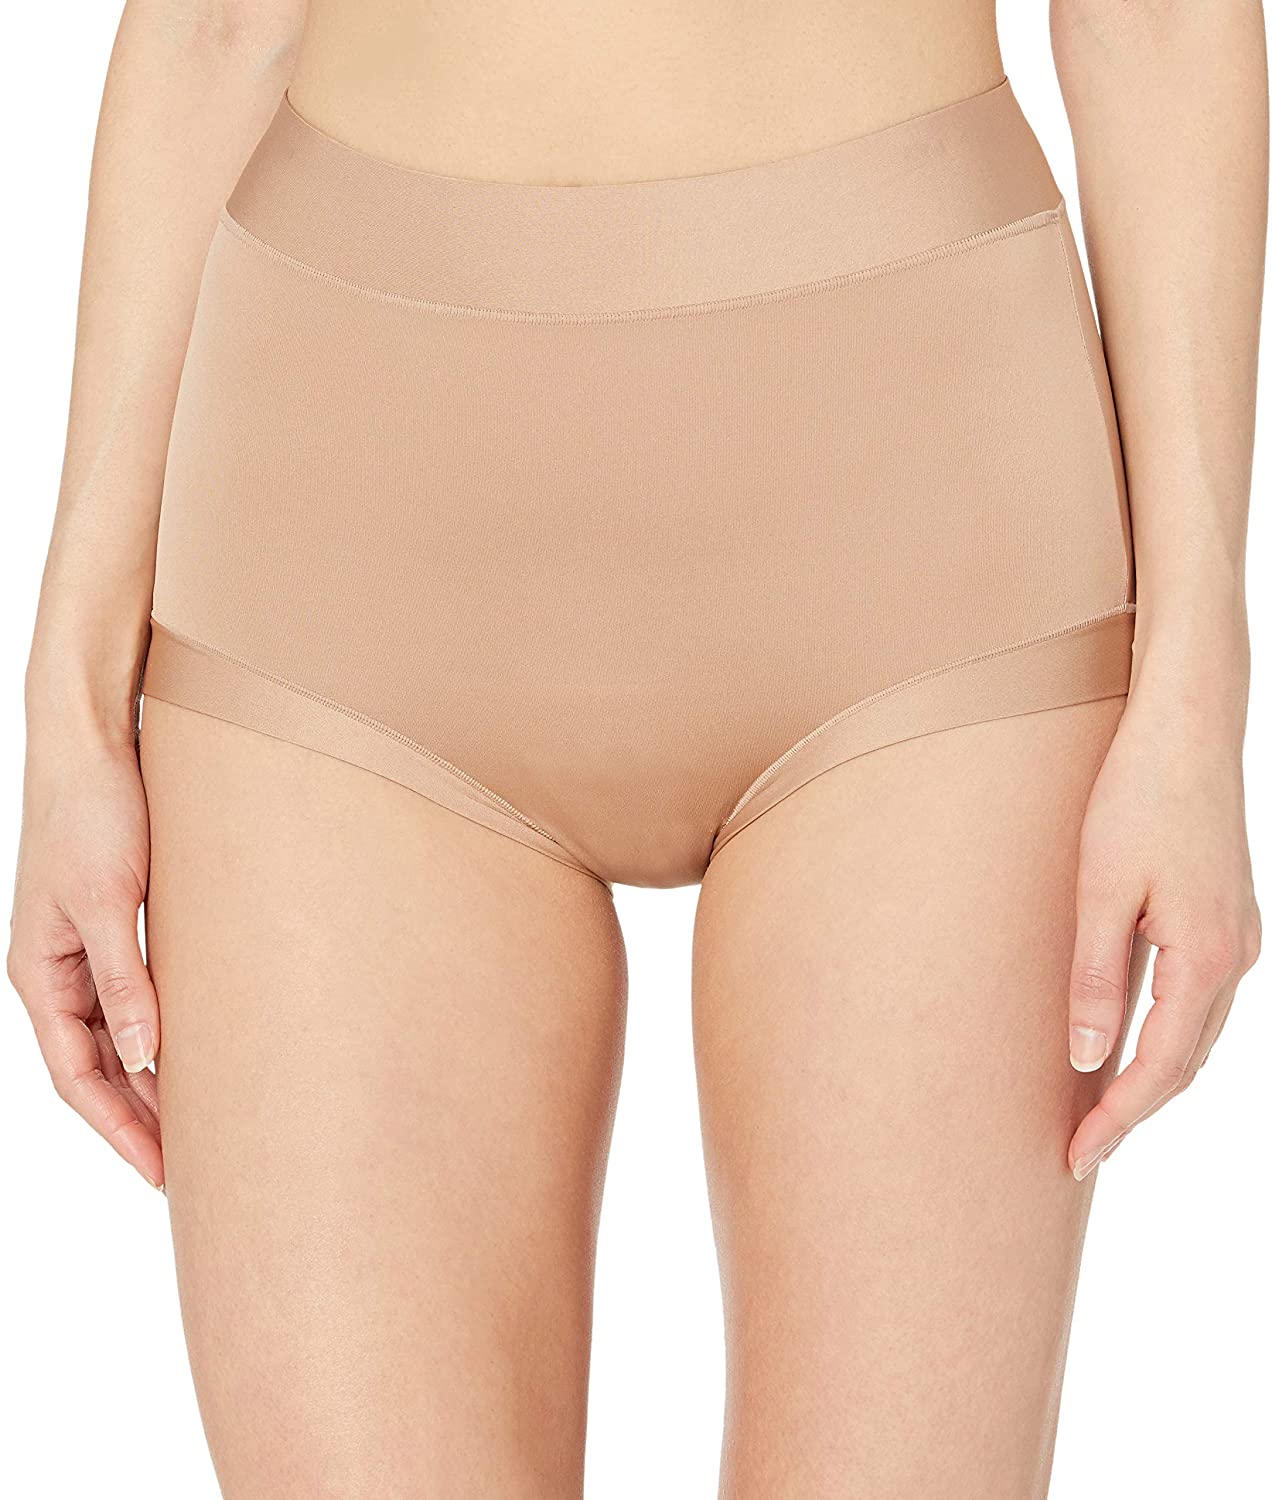 Price:$5.00 Warner's Women's Easy Does It Brief Panty at Amazon Women’s Clothing store